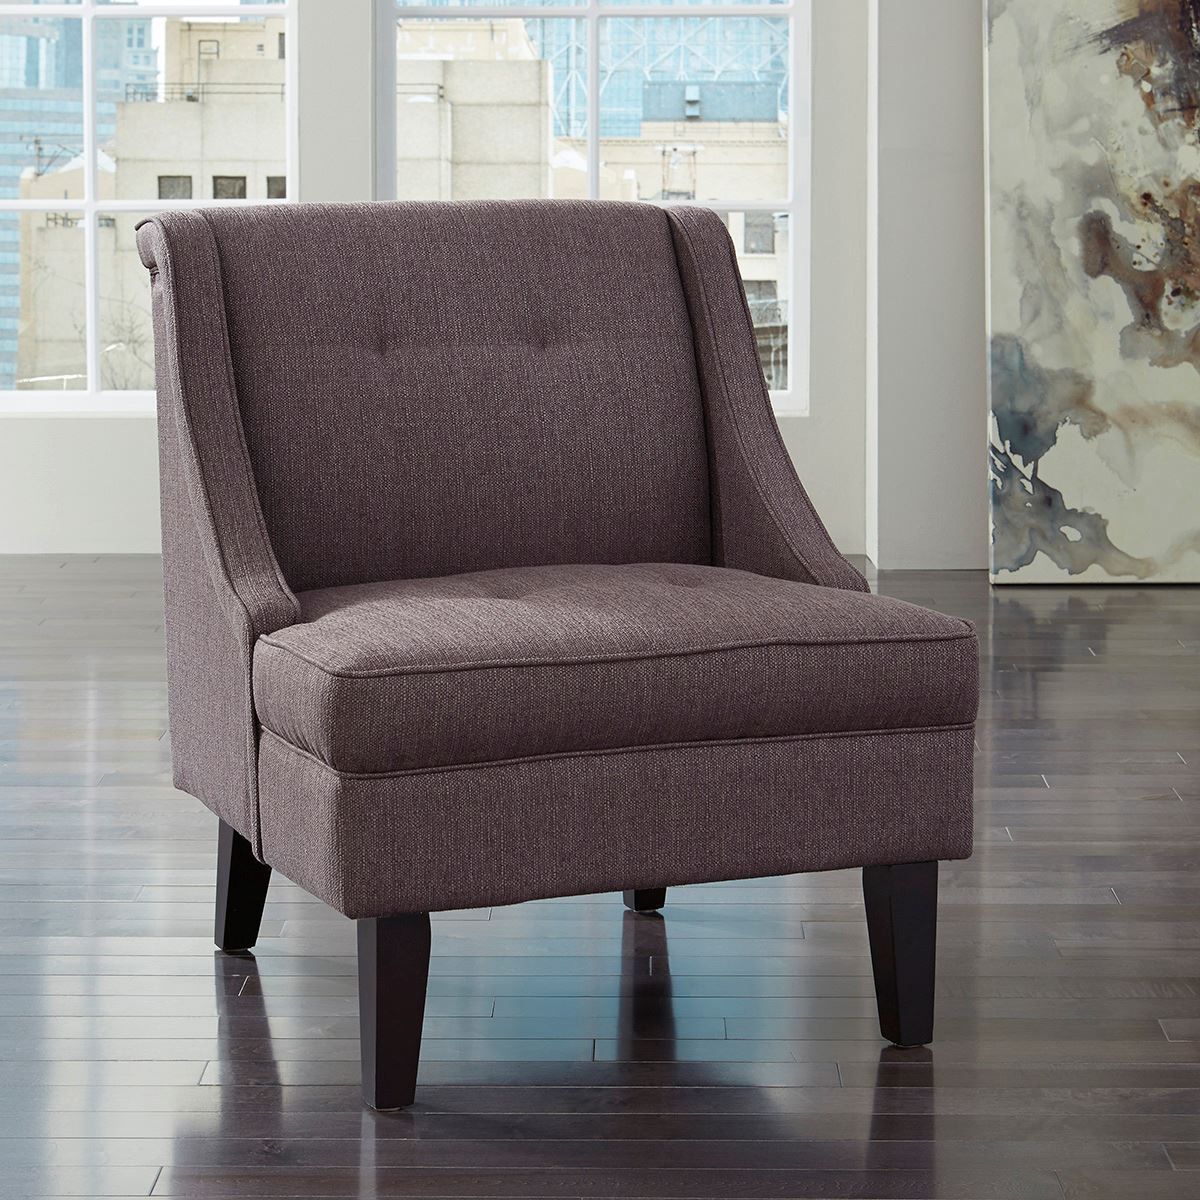 Gray Accent Chair | Living Room Chairs | Lifestyle Furniturebabette's Throughout Satin Gray Wood Accent Stools (View 5 of 20)